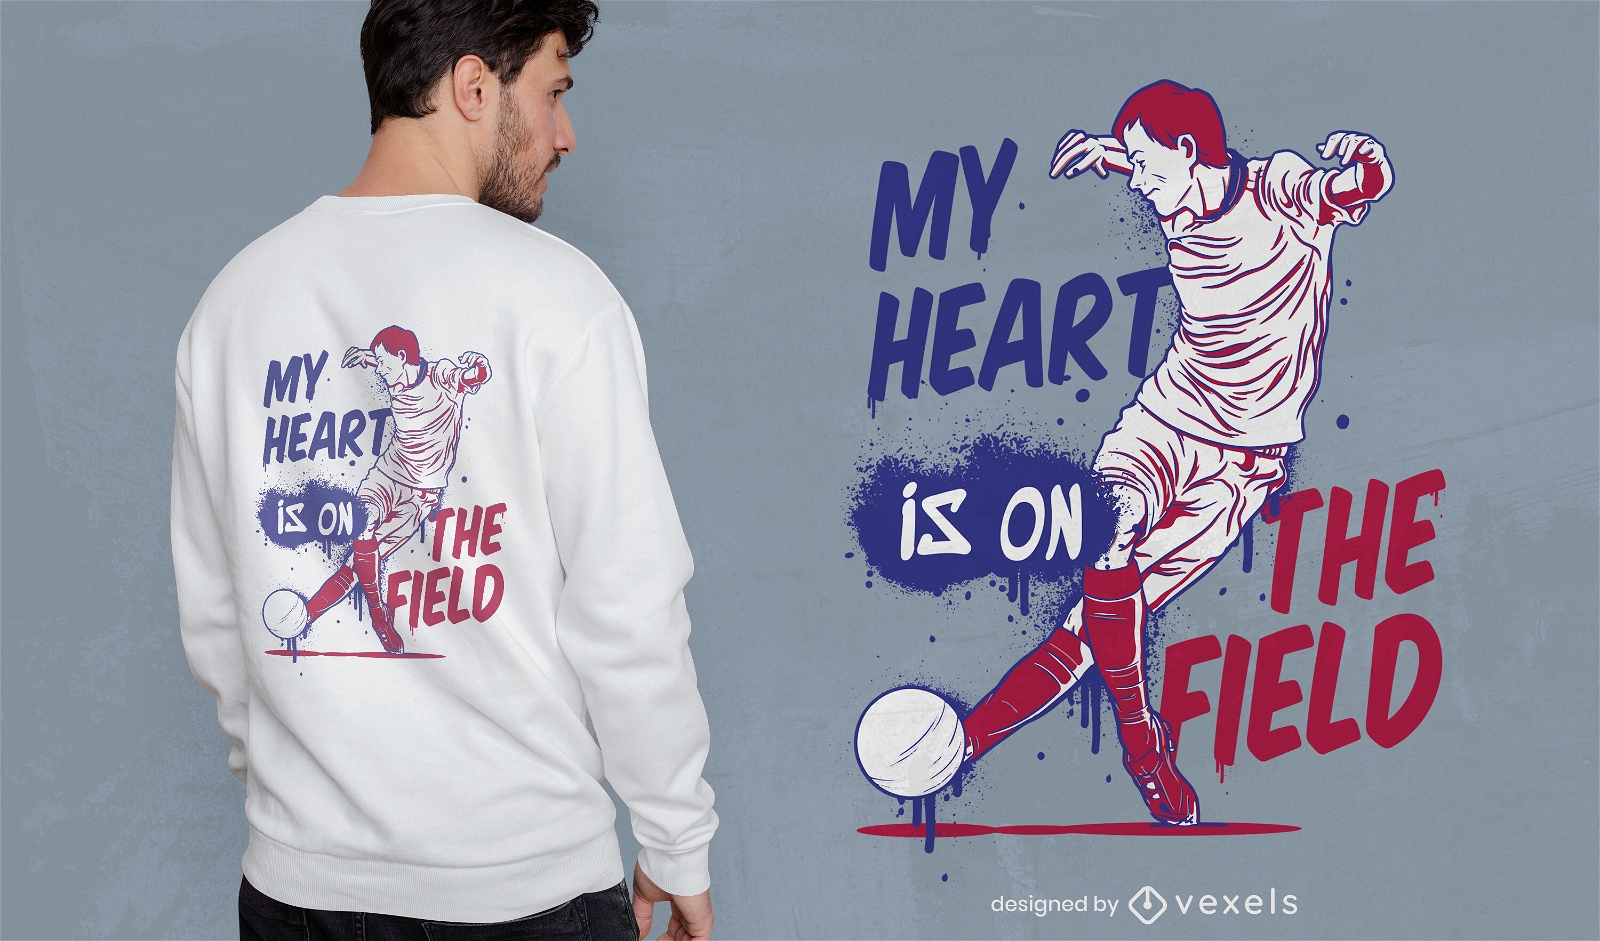 Soccer player heart quote t-shirt design